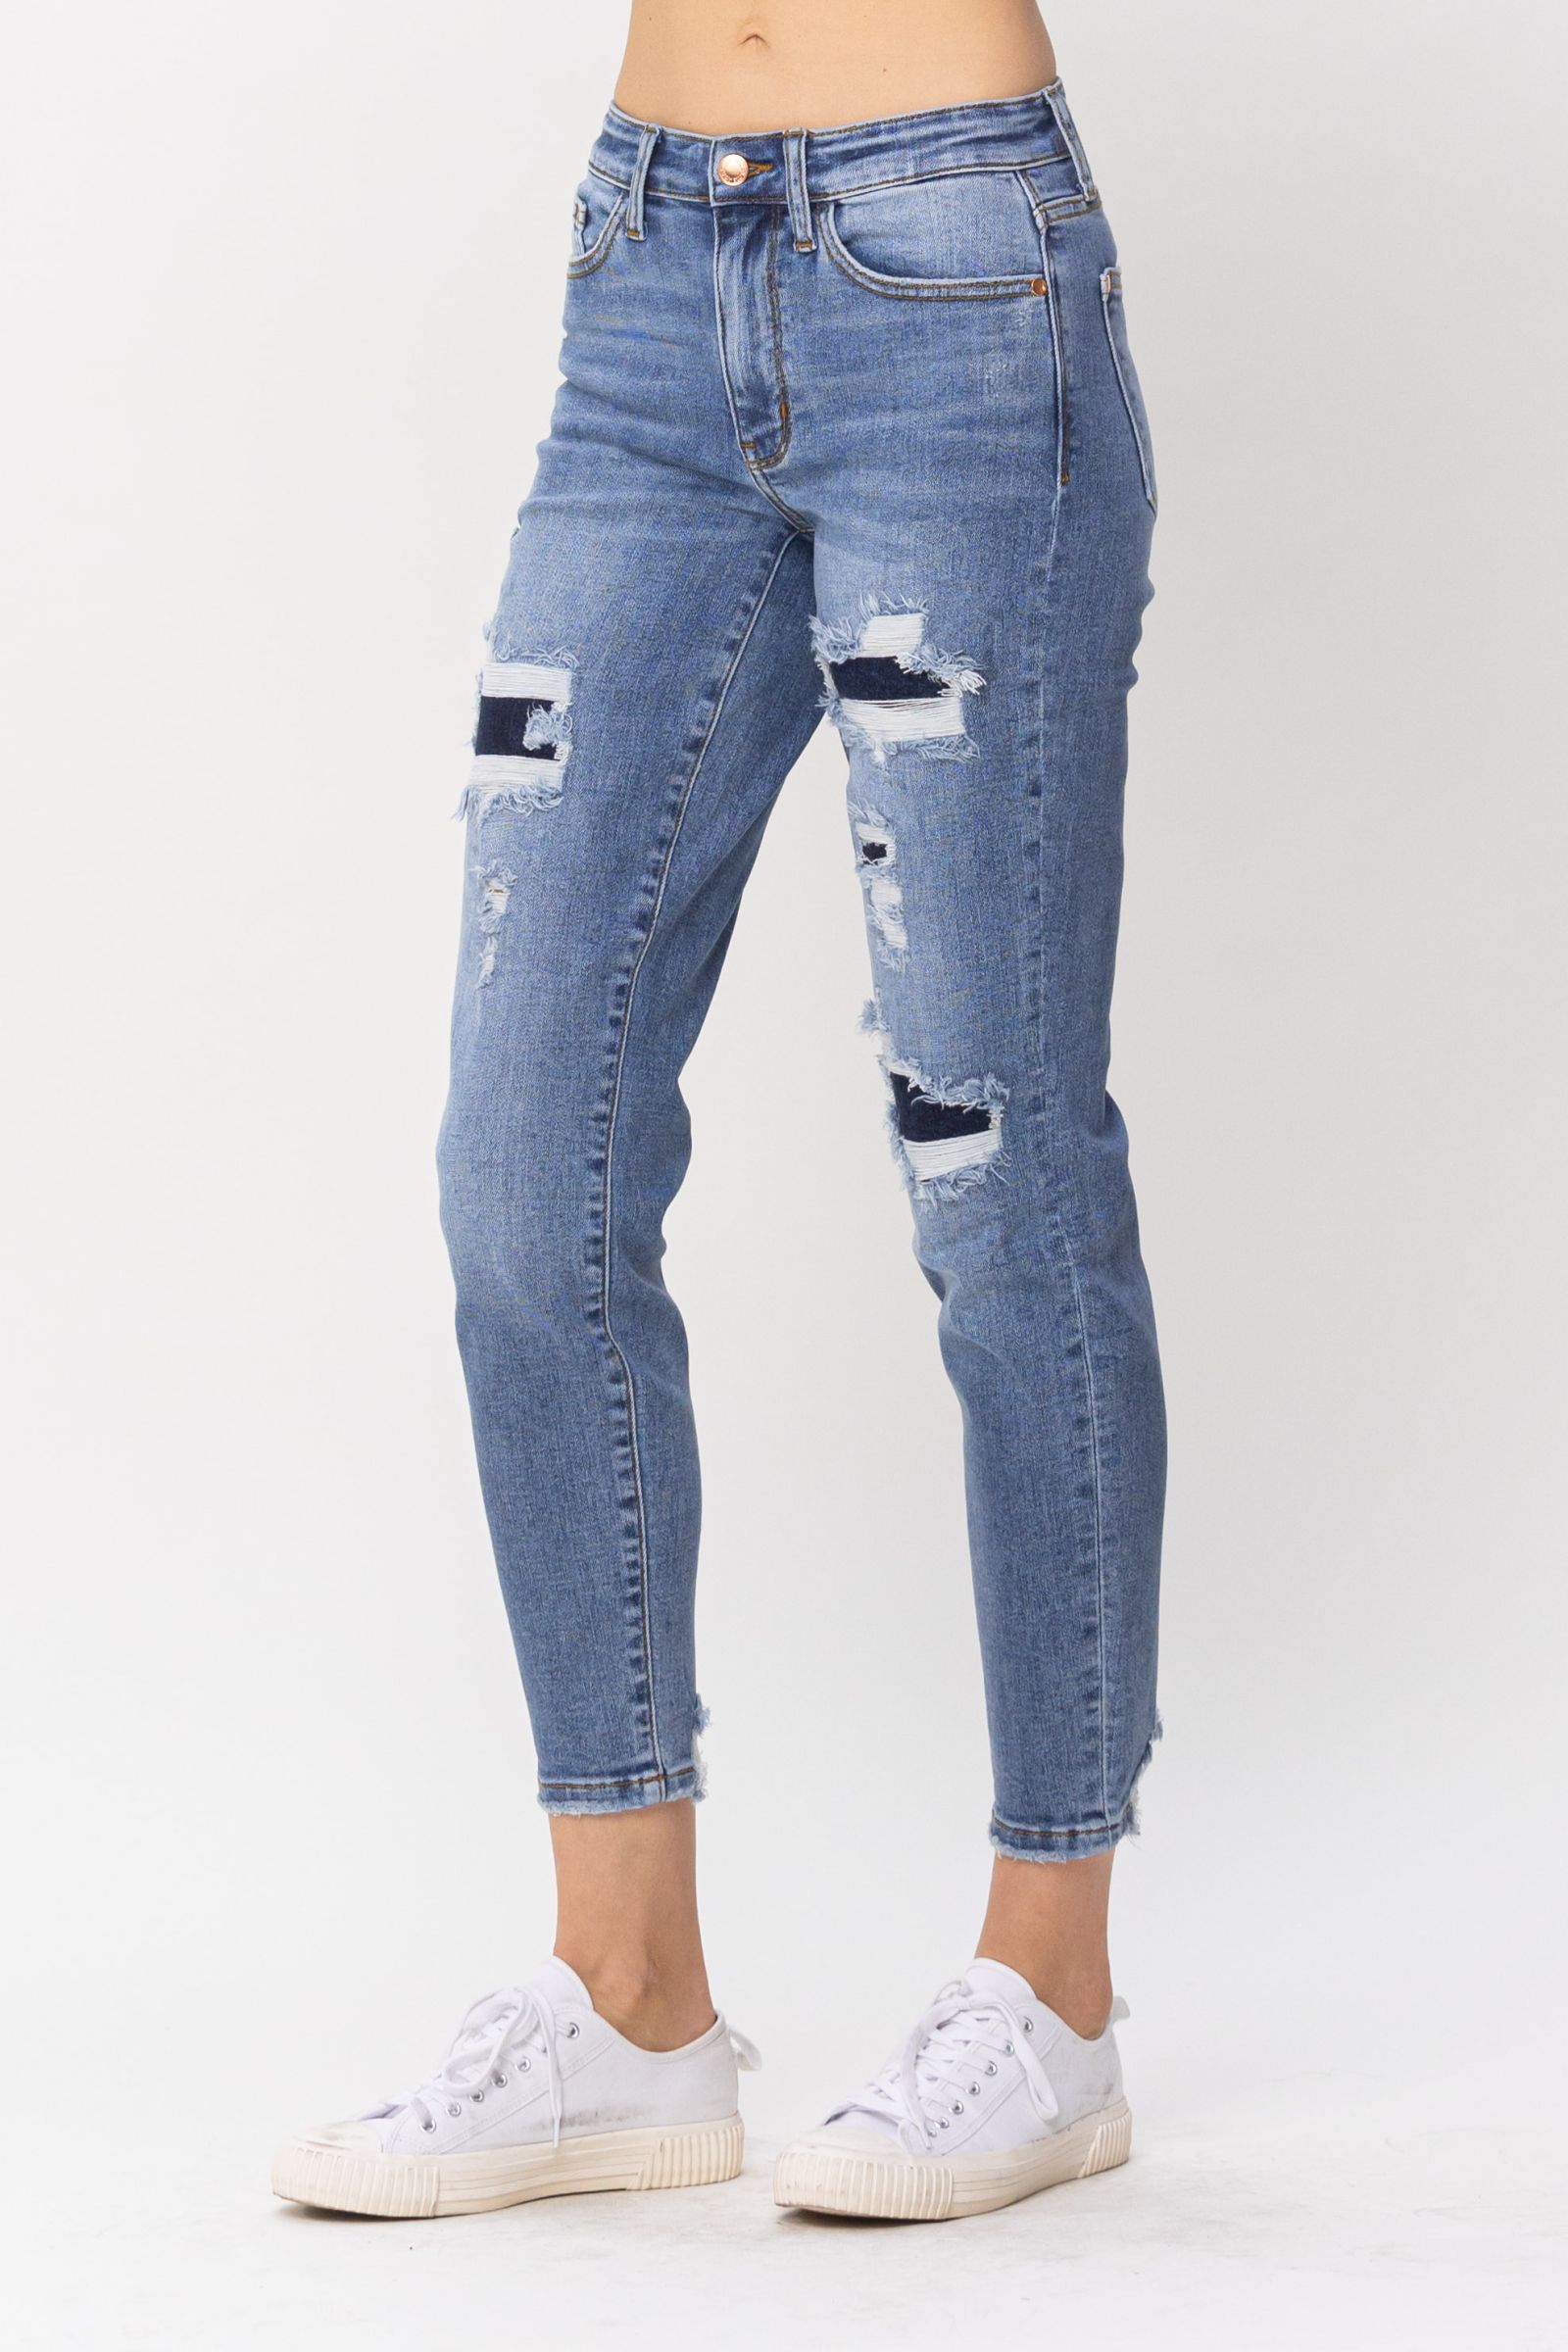 Judy Blue Gloria Mid-Rise Relaxed Fit Patch Distressed Jeans - Medium Wash